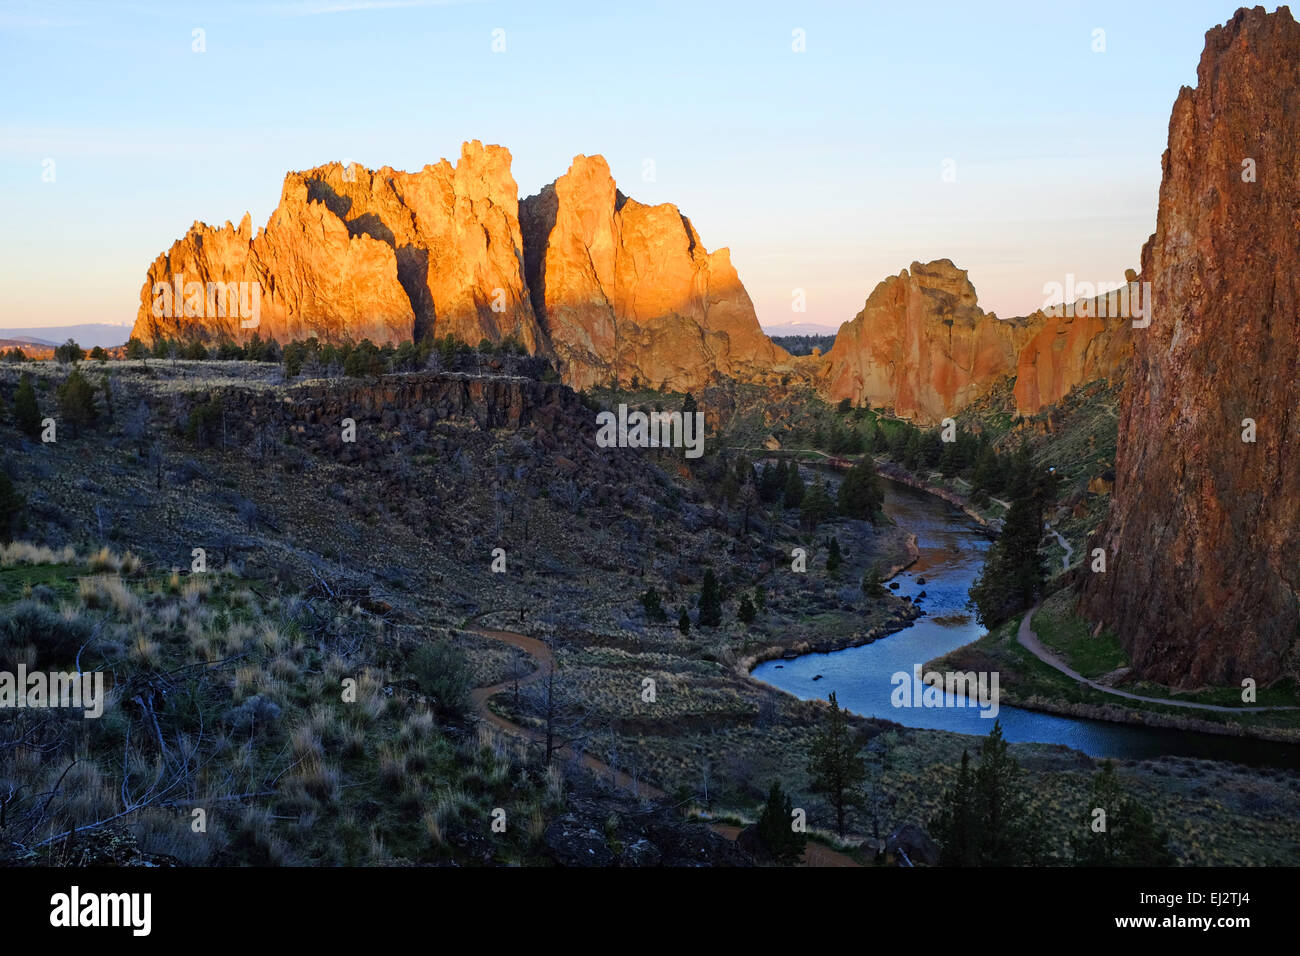 Smith Rock State Park rock formations at sunrise, central Oregon near the town of Terrebonne. Stock Photo